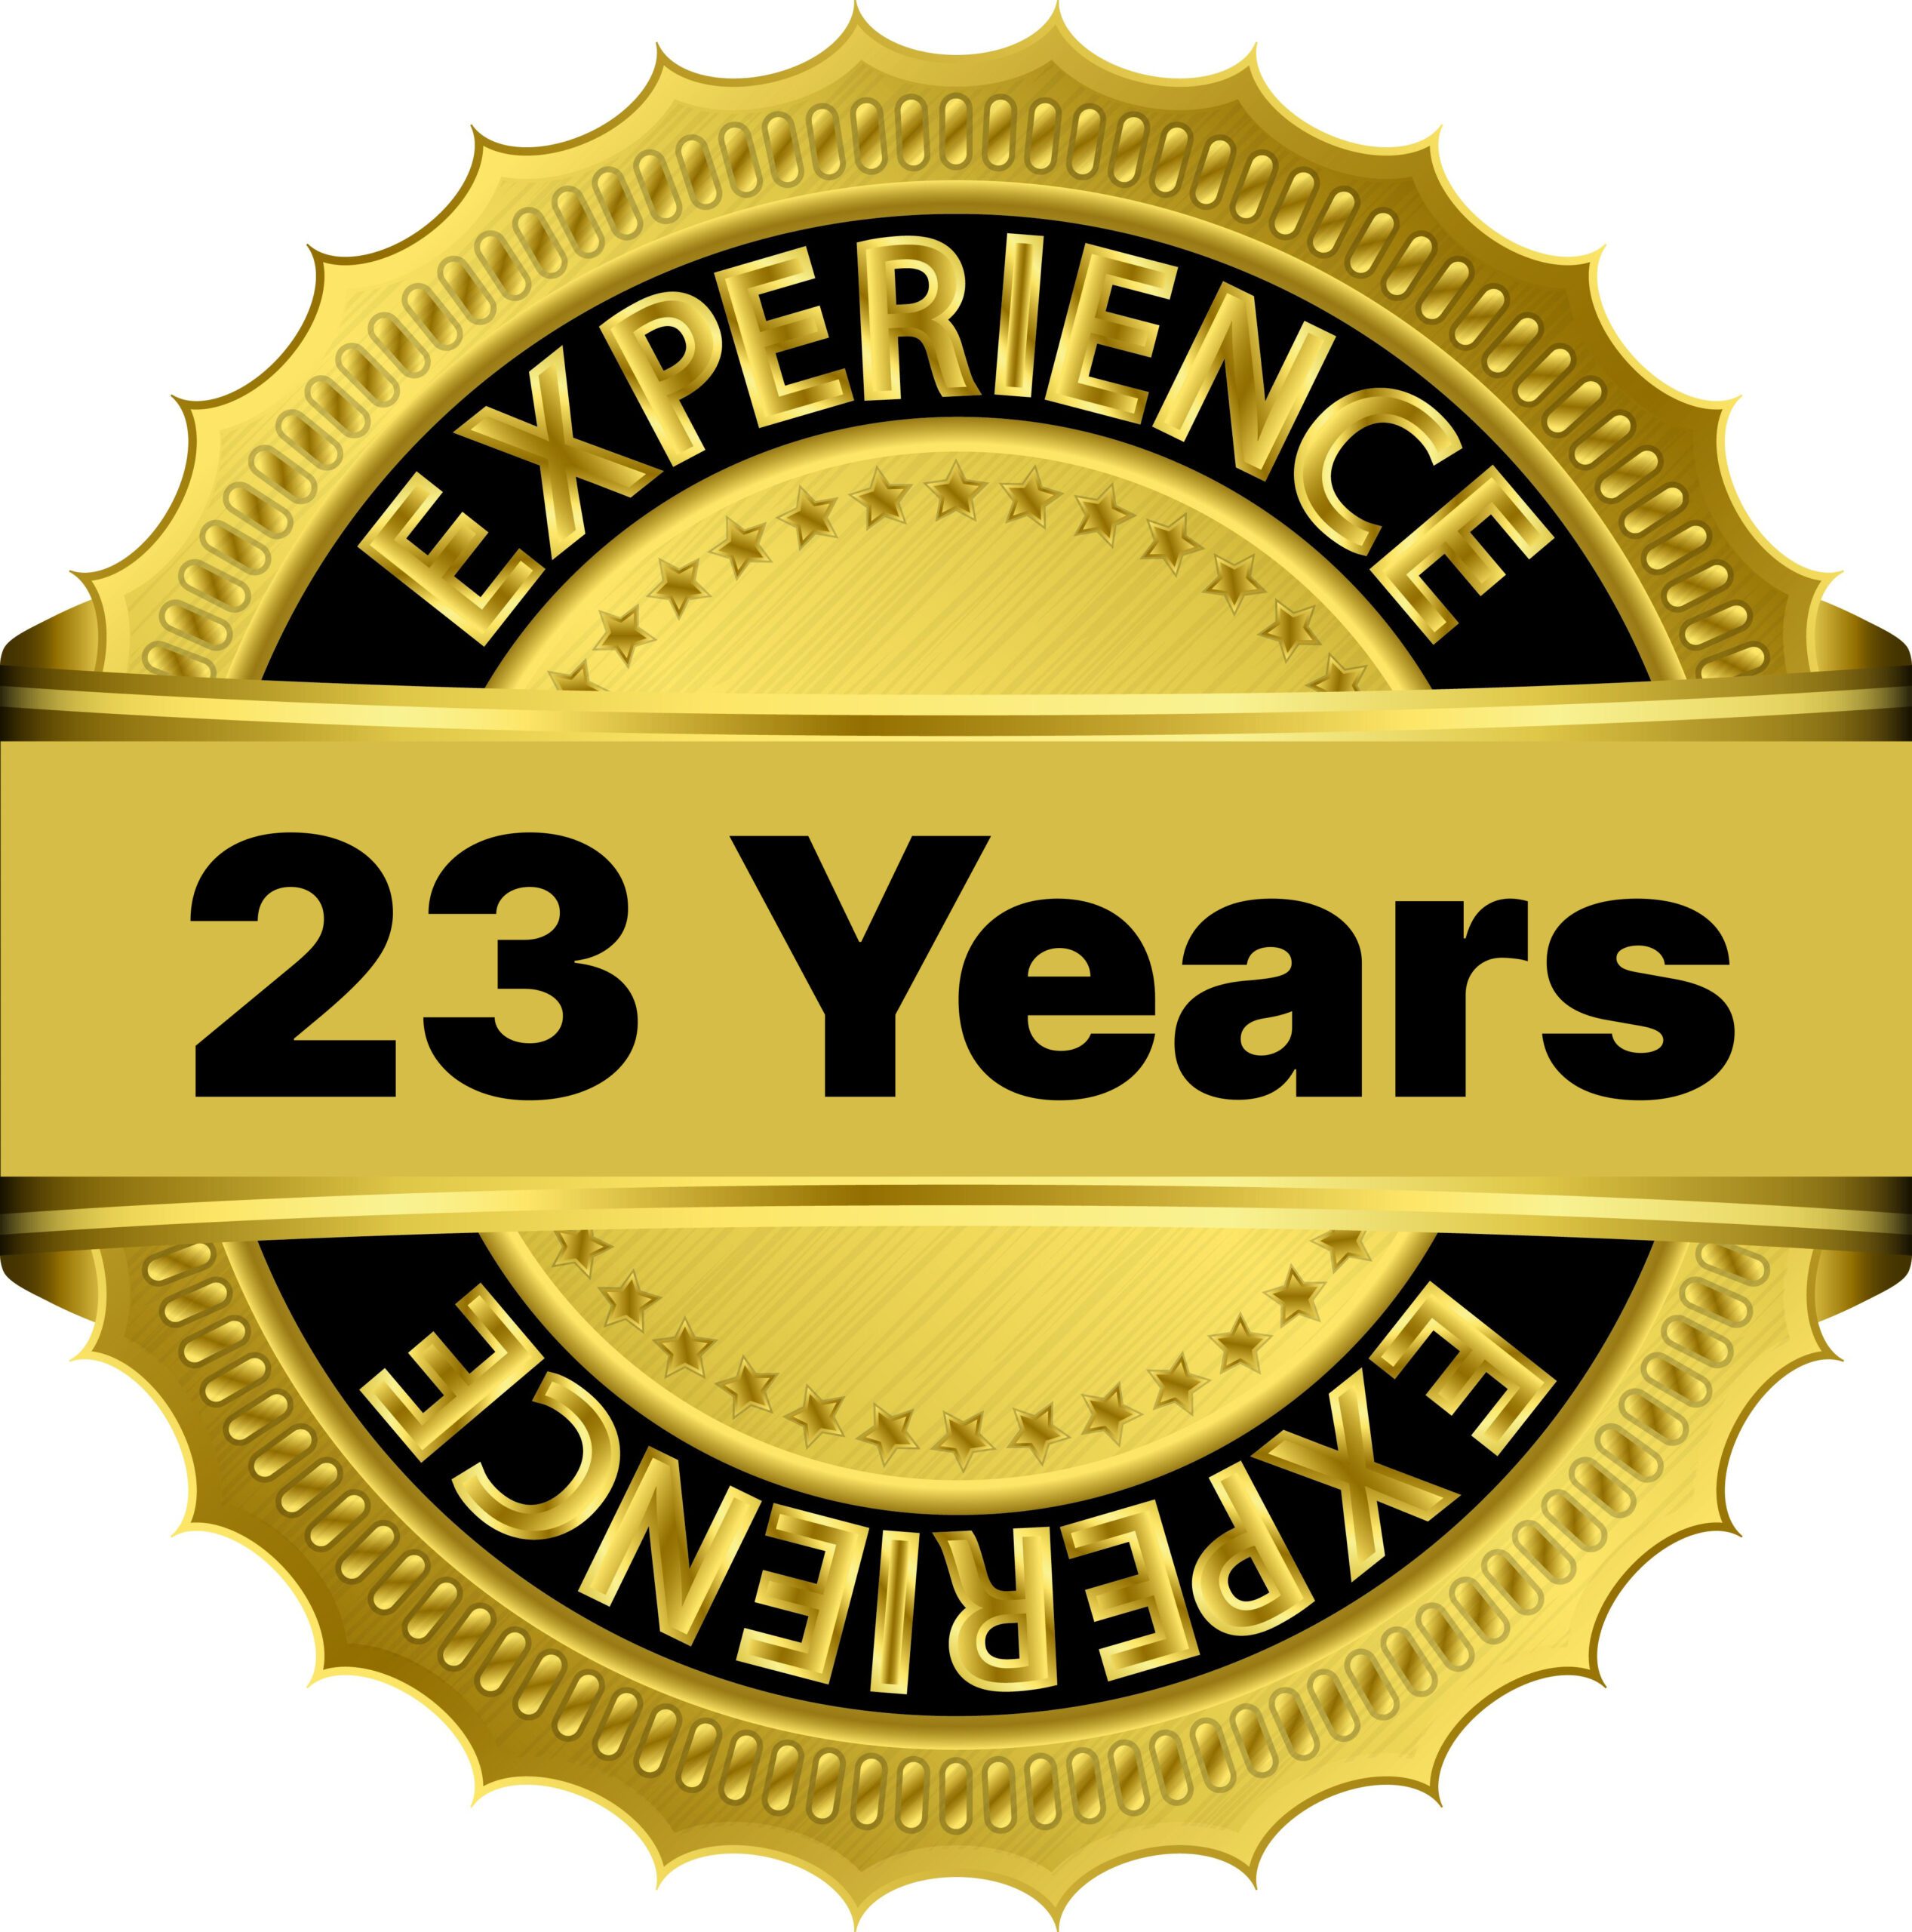 23 Years experience